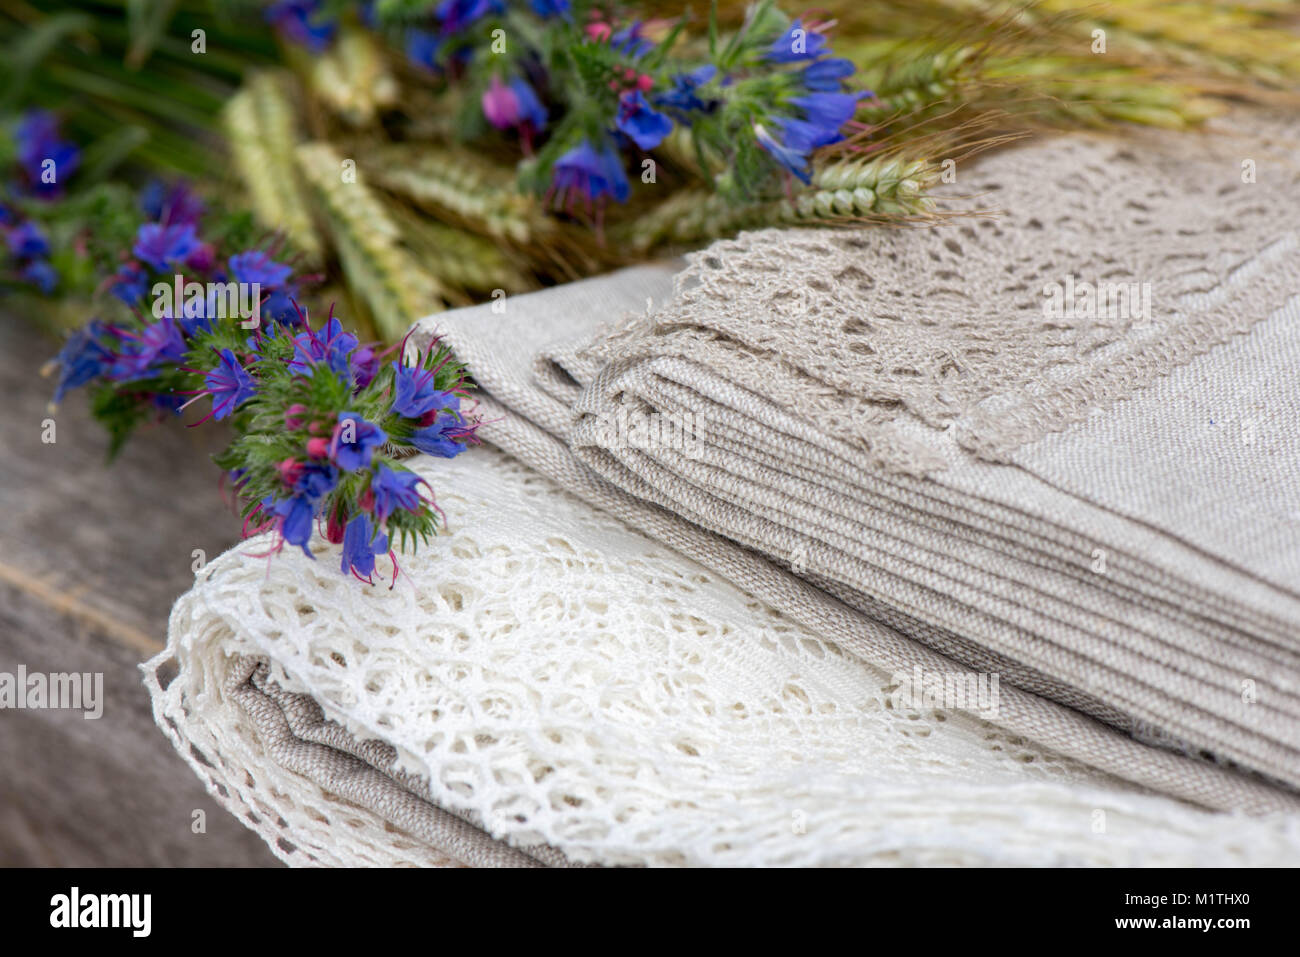 https://c8.alamy.com/comp/M1THX0/shot-of-linen-tablecloths-towels-and-napkins-with-grey-and-white-lace-M1THX0.jpg